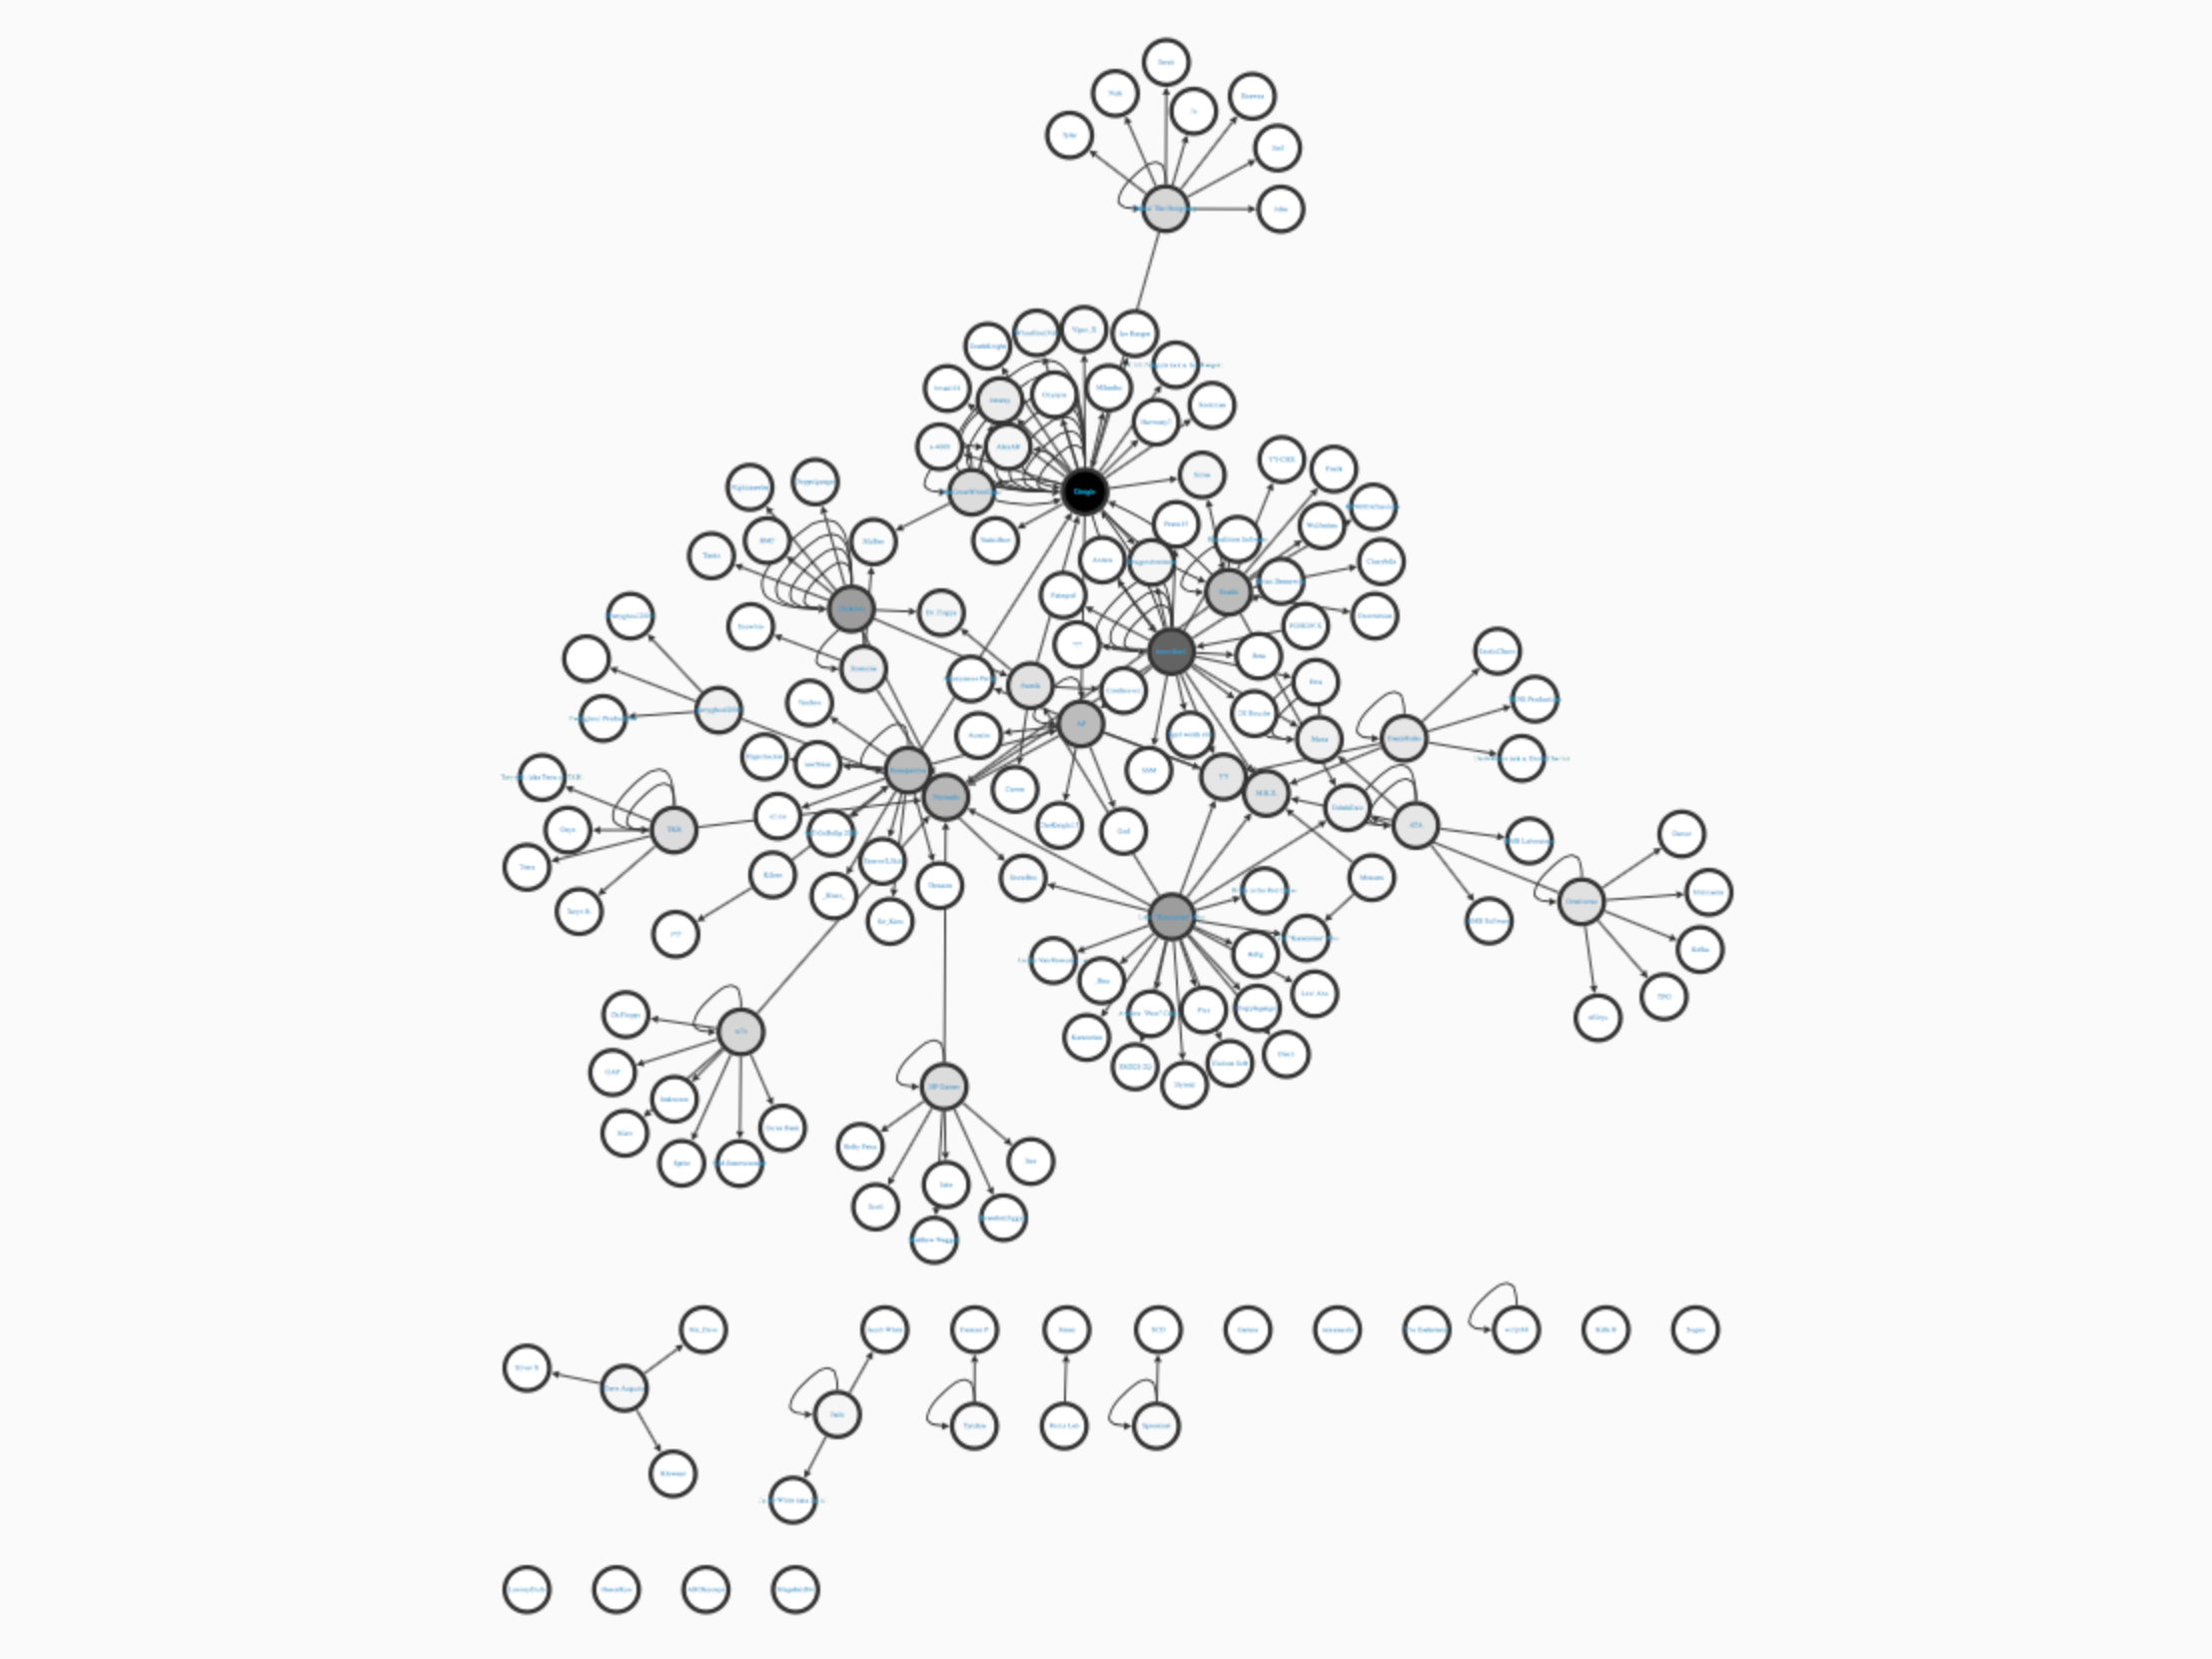 Community network graphs made in cytoscape